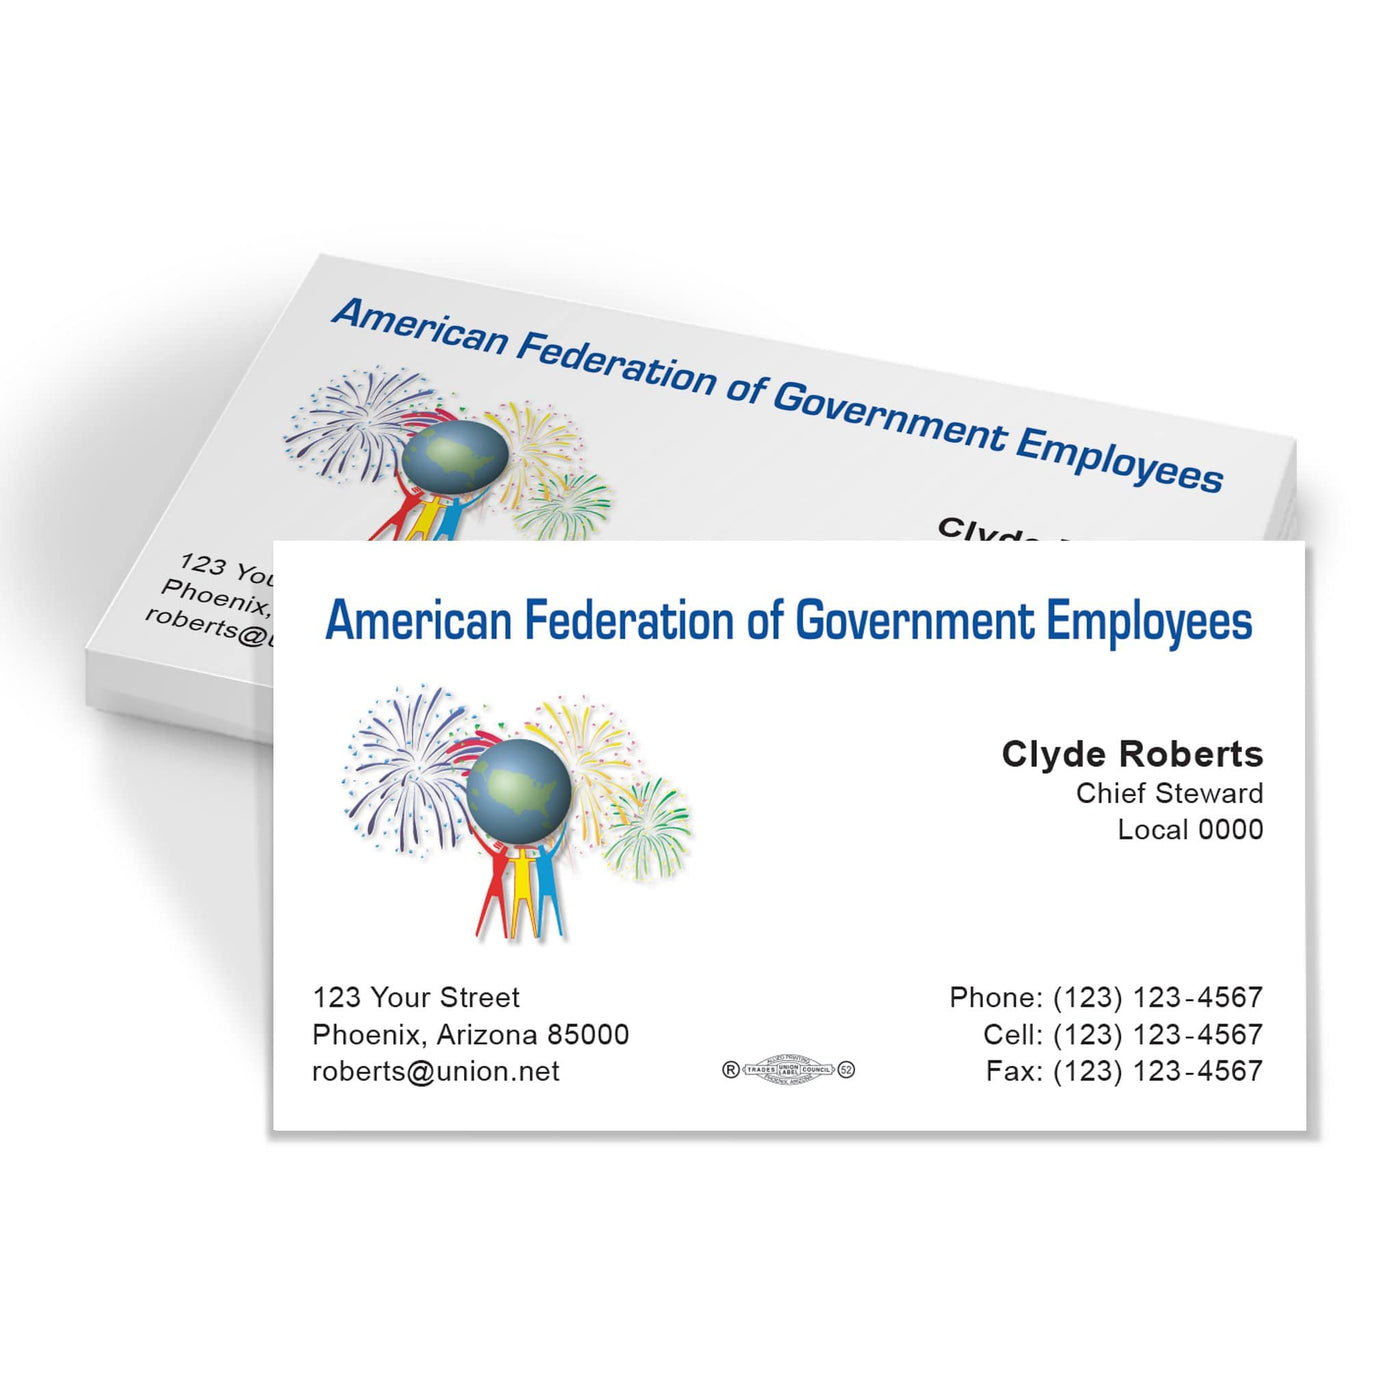 AFGE Union Printed business with Union label 